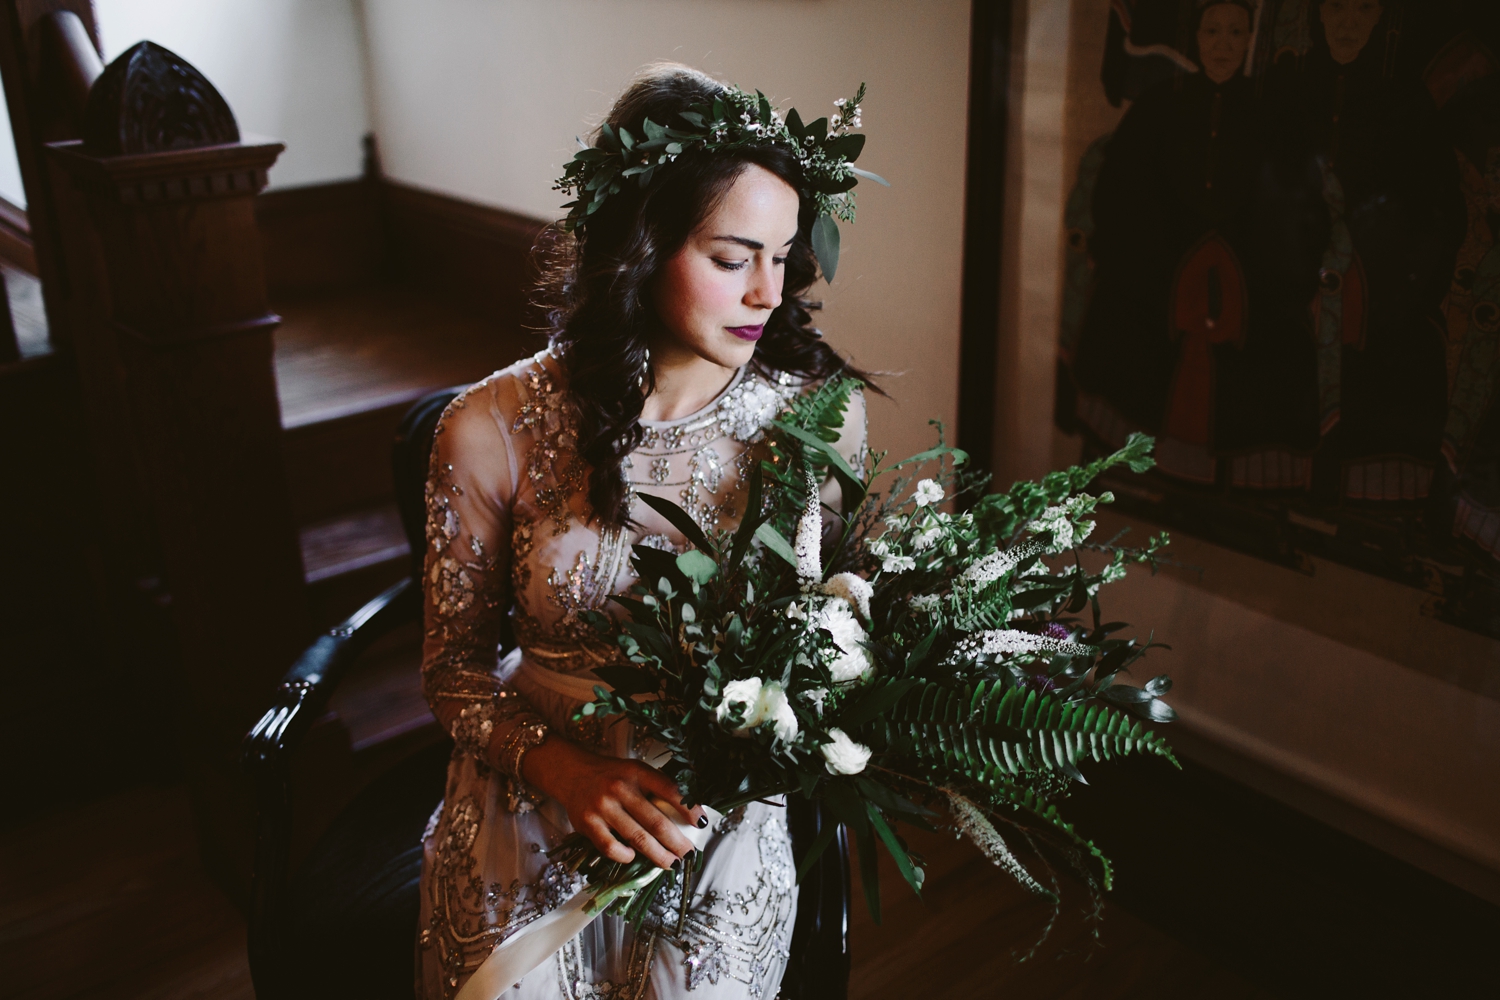 grand rapids michigan flower crown and whimsical wedding bouquet 